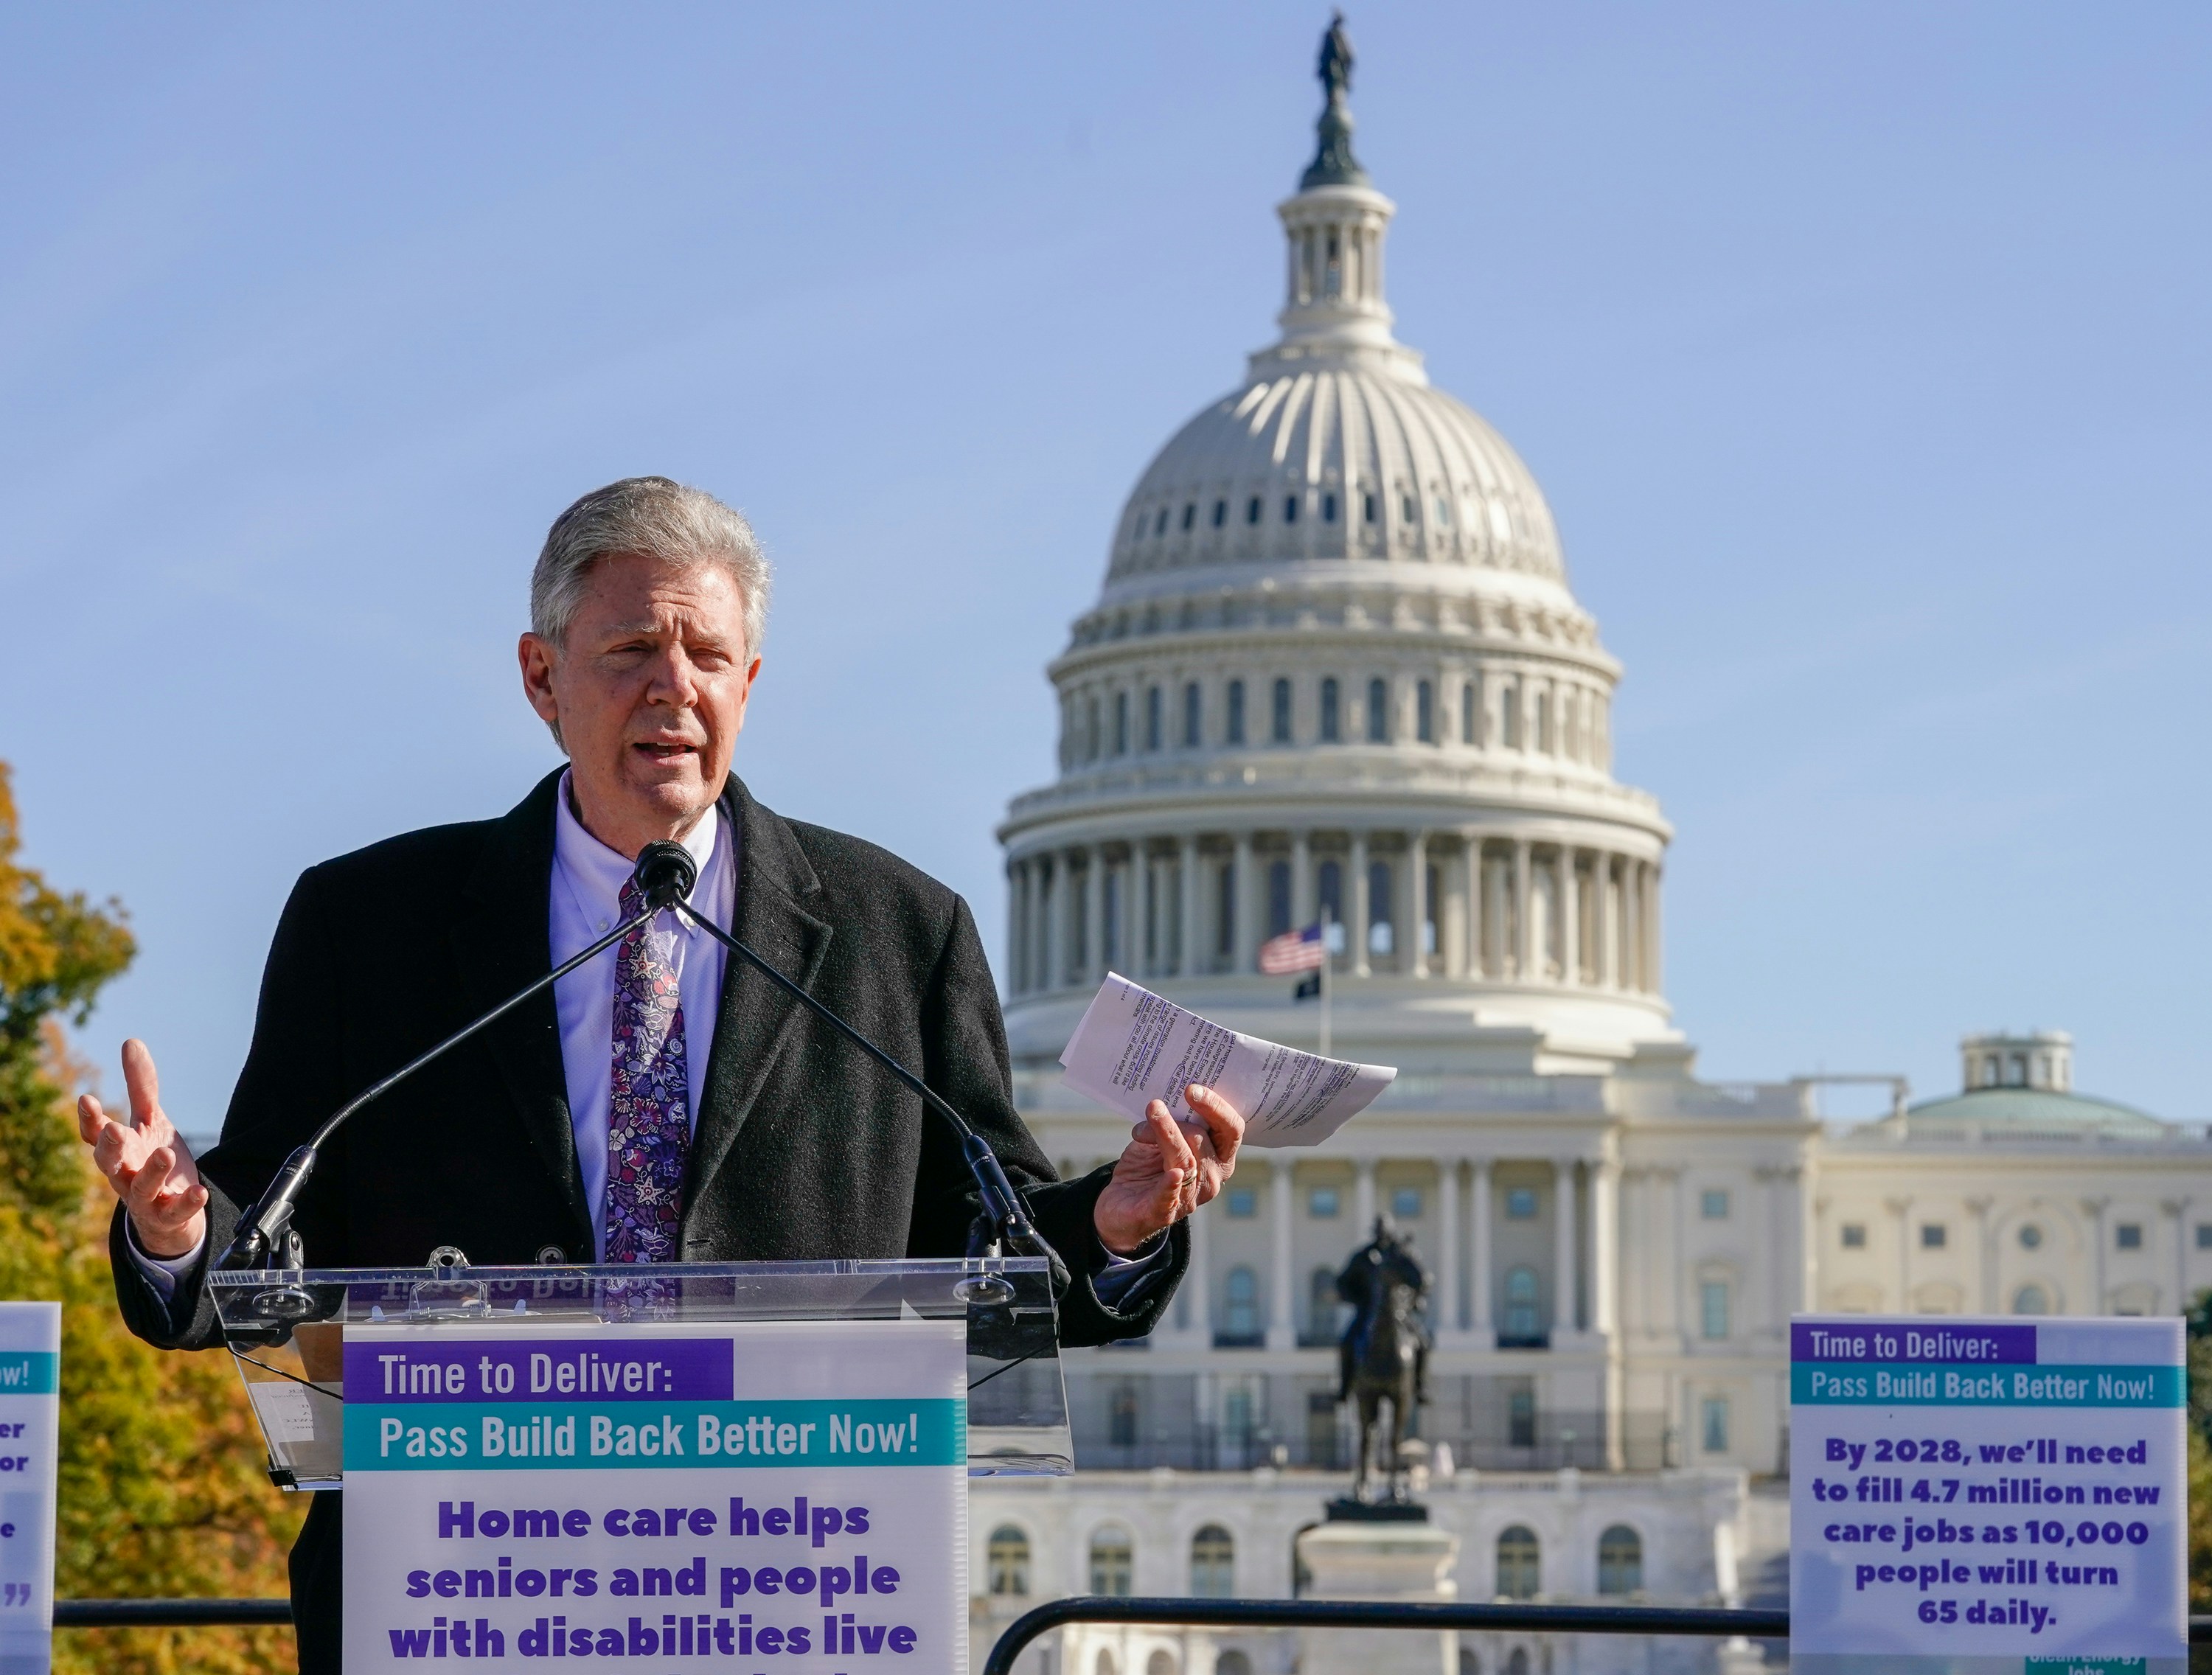 WASHINGTON, DC - NOVEMBER 16: Rep. Frank Pallone (D-NJ) speaks at the "Time to Deliver" Home Care Workers rally and march on November 16, 2021 in Washington, DC. (Photo by Jemal Countess/Getty Images for SEIU)